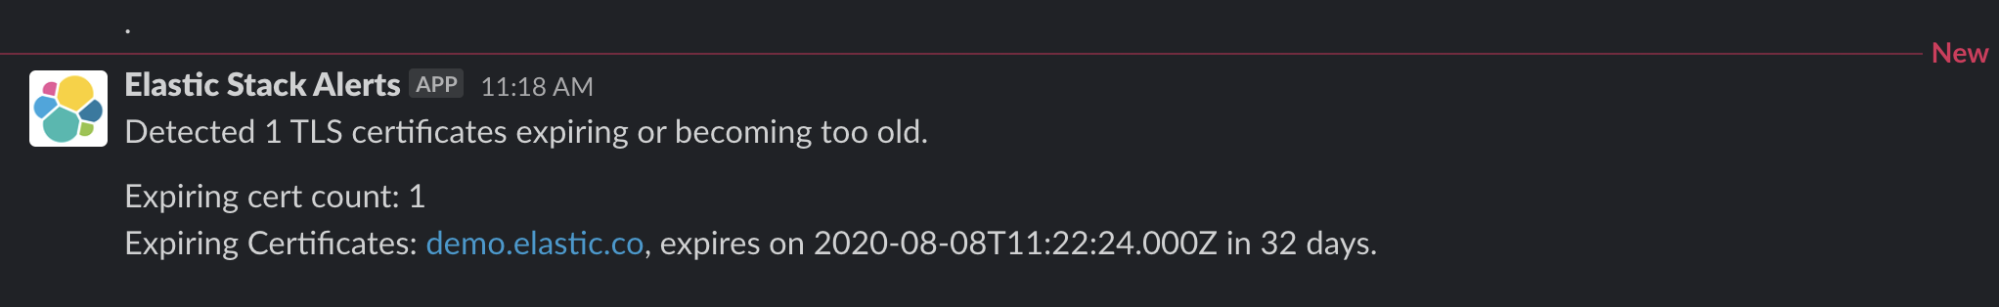 A Slack notification showing that a certificate is expiring